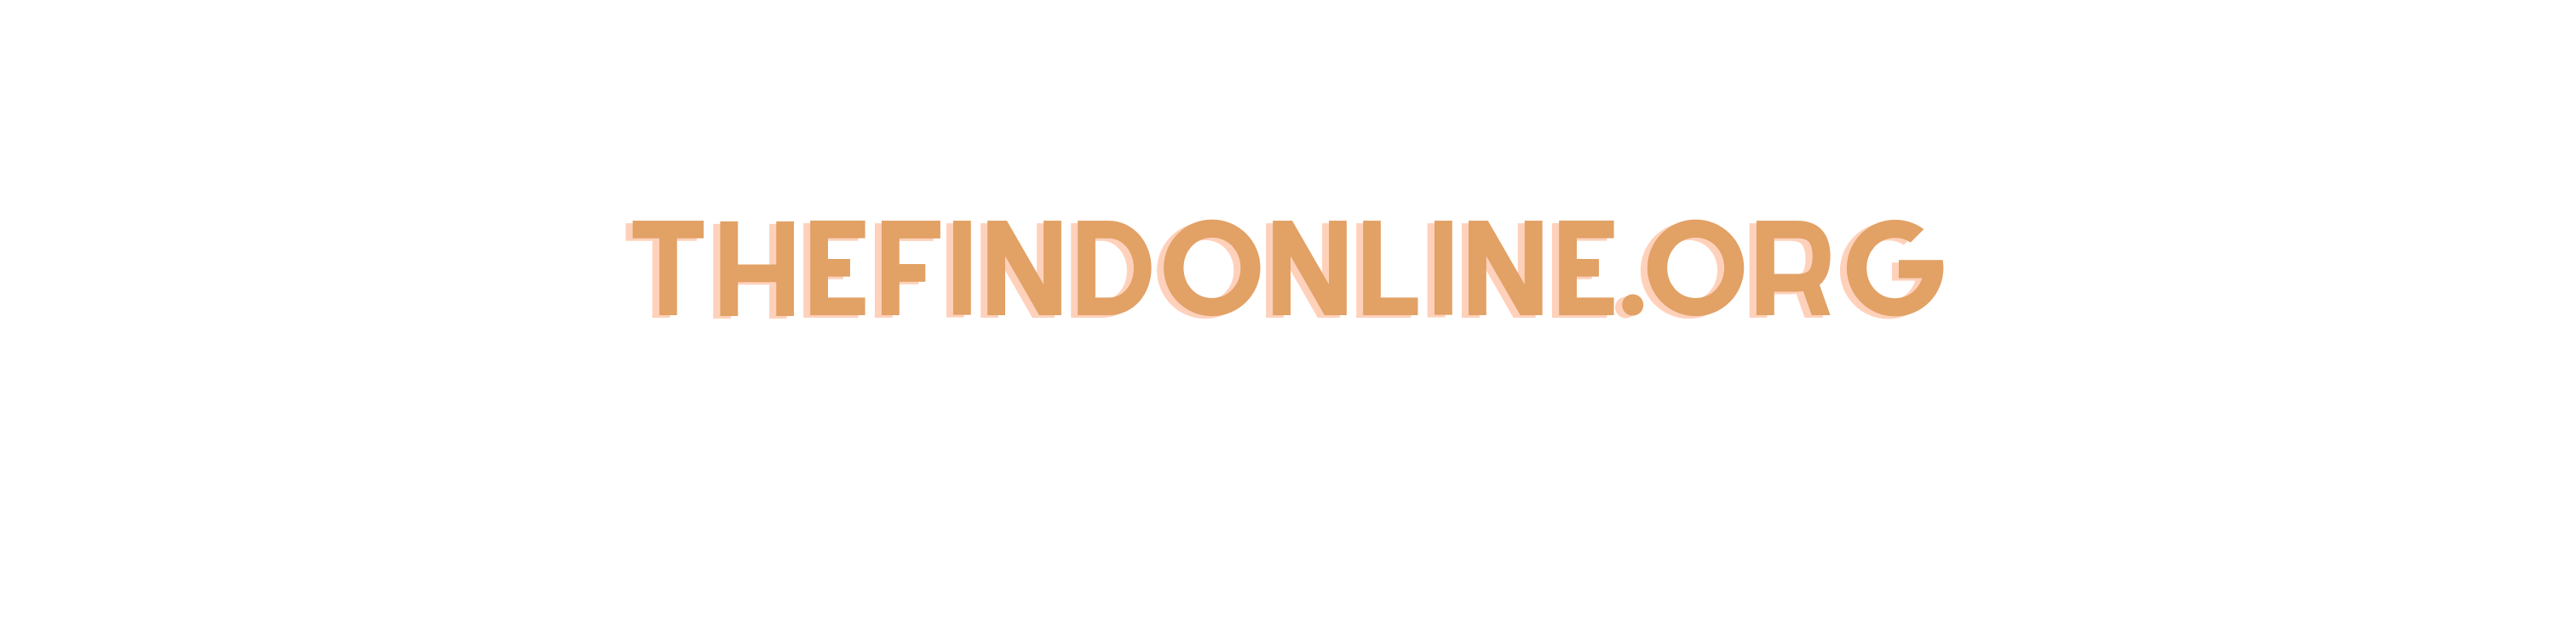 thefindonline.org